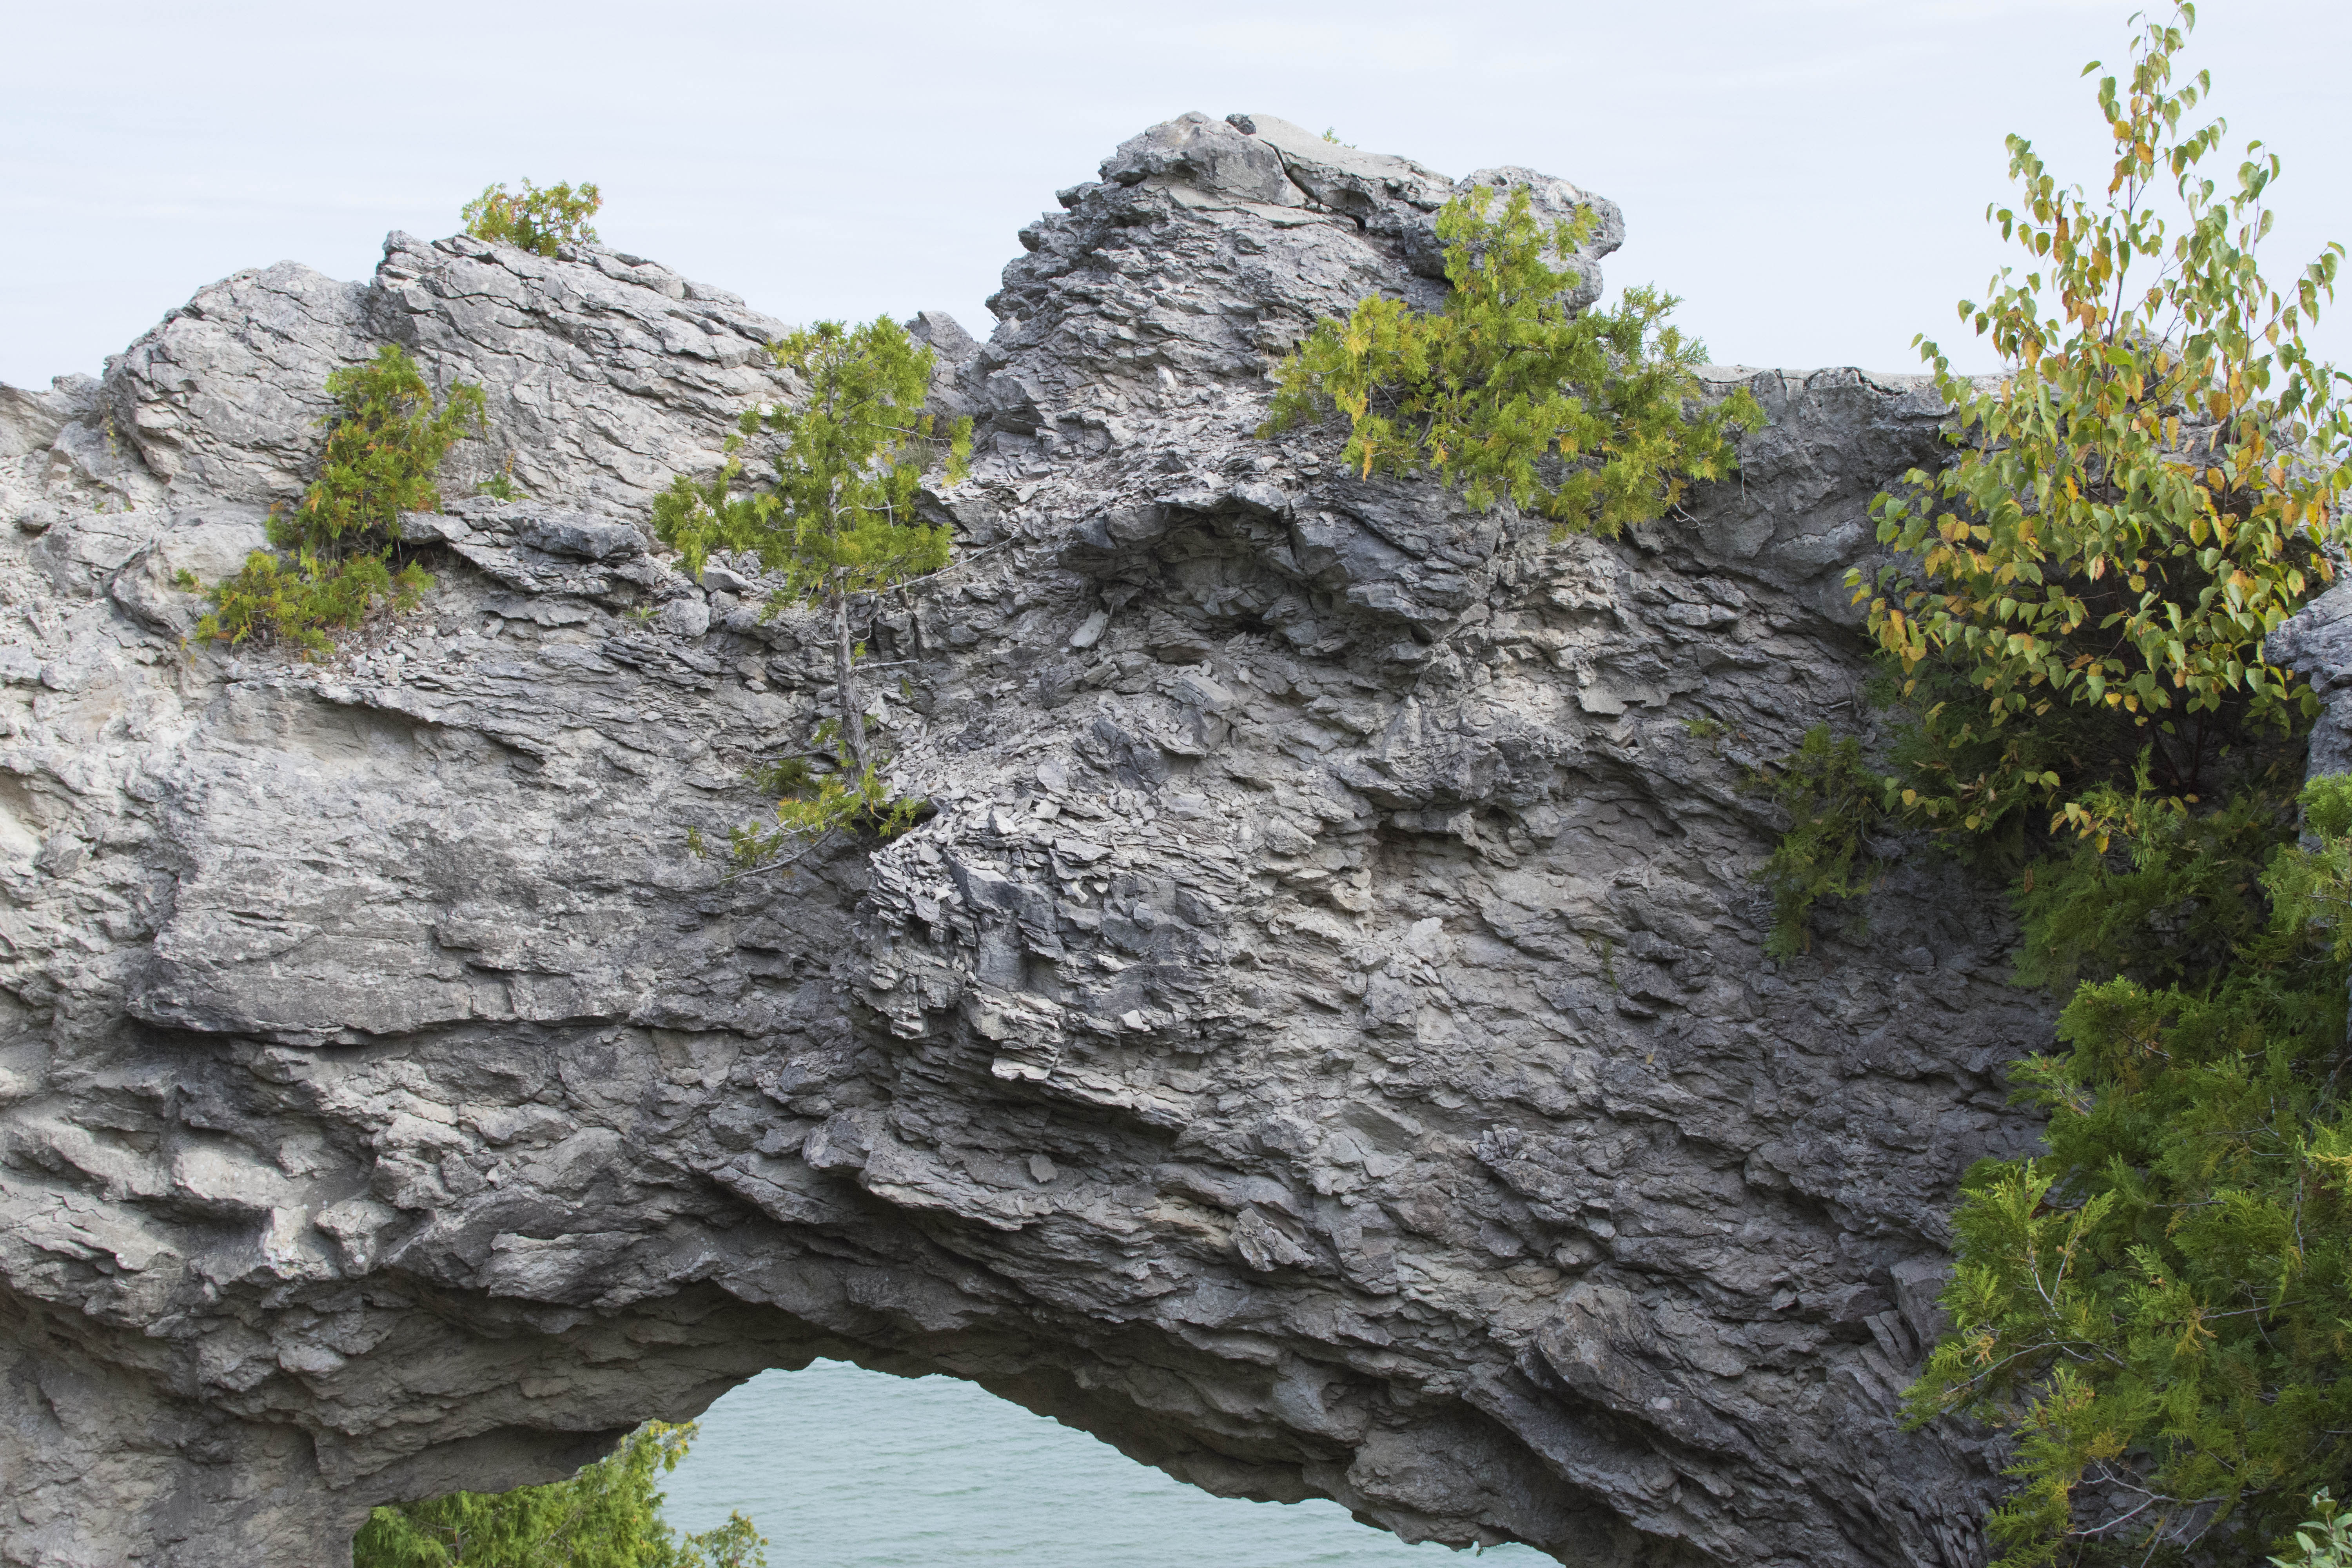 A large gray limestone arch formation with trees growing from the rock. Blue water is in the background.